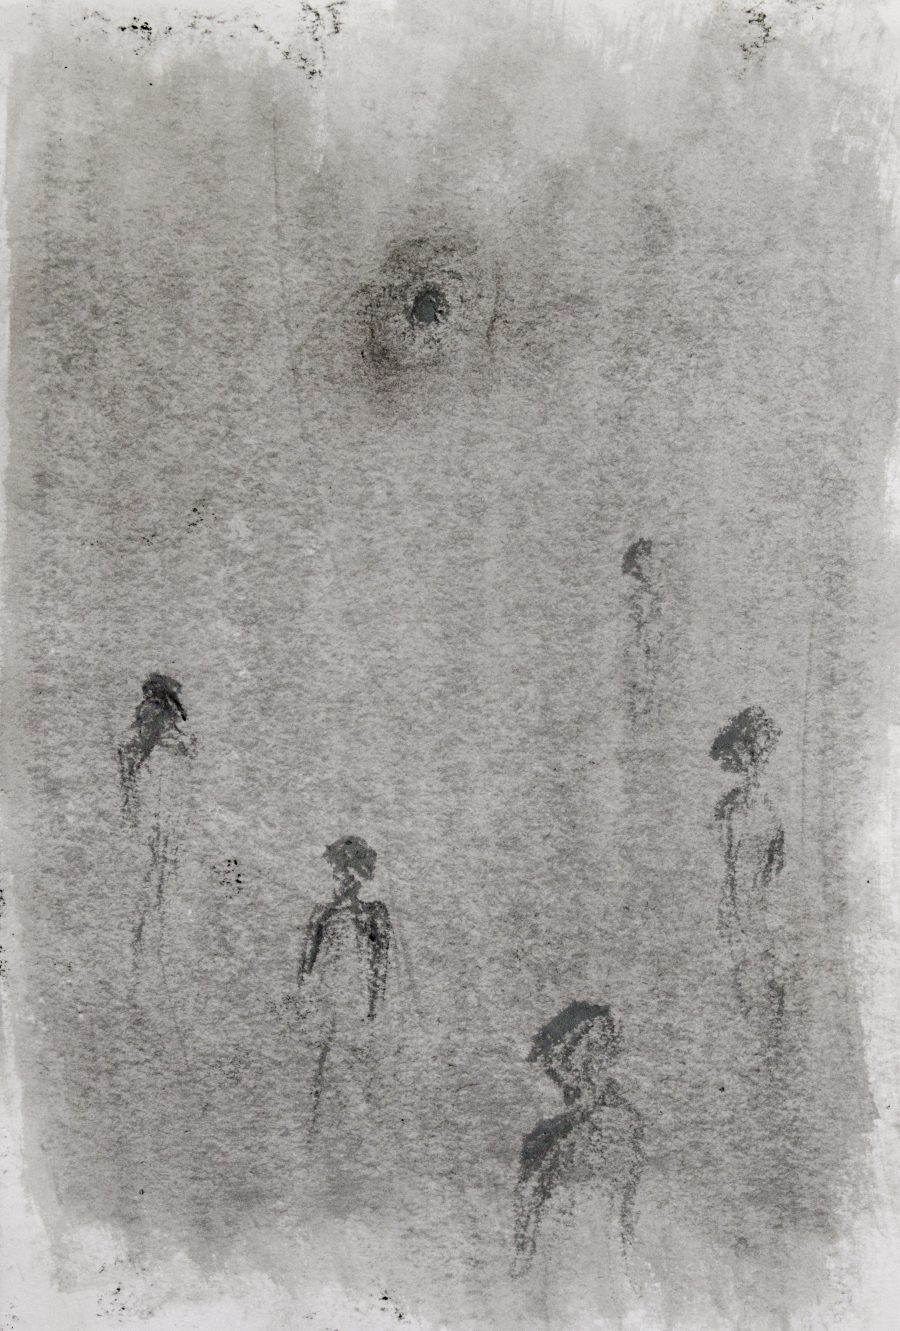 A charcoal drawing with abstract human figures.